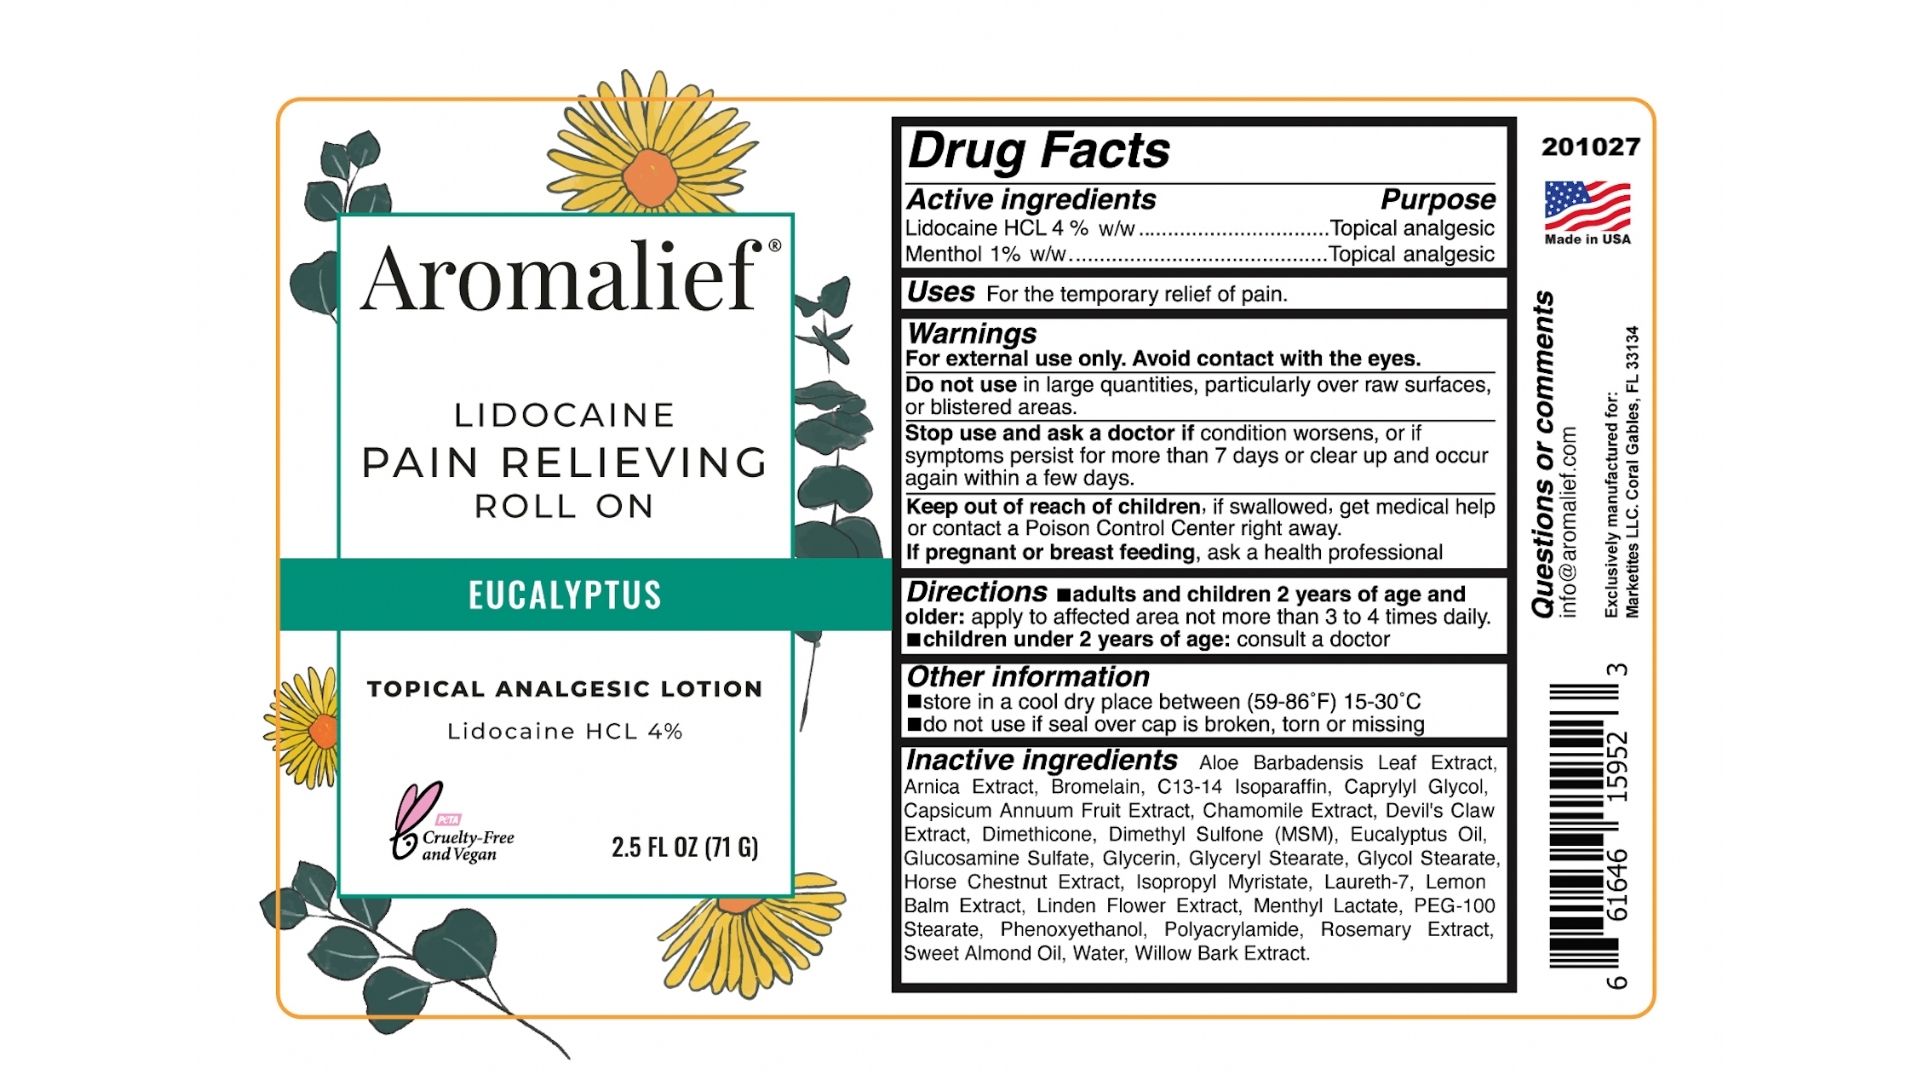 Aromalief Lidocaine Pain Relieving Roll On